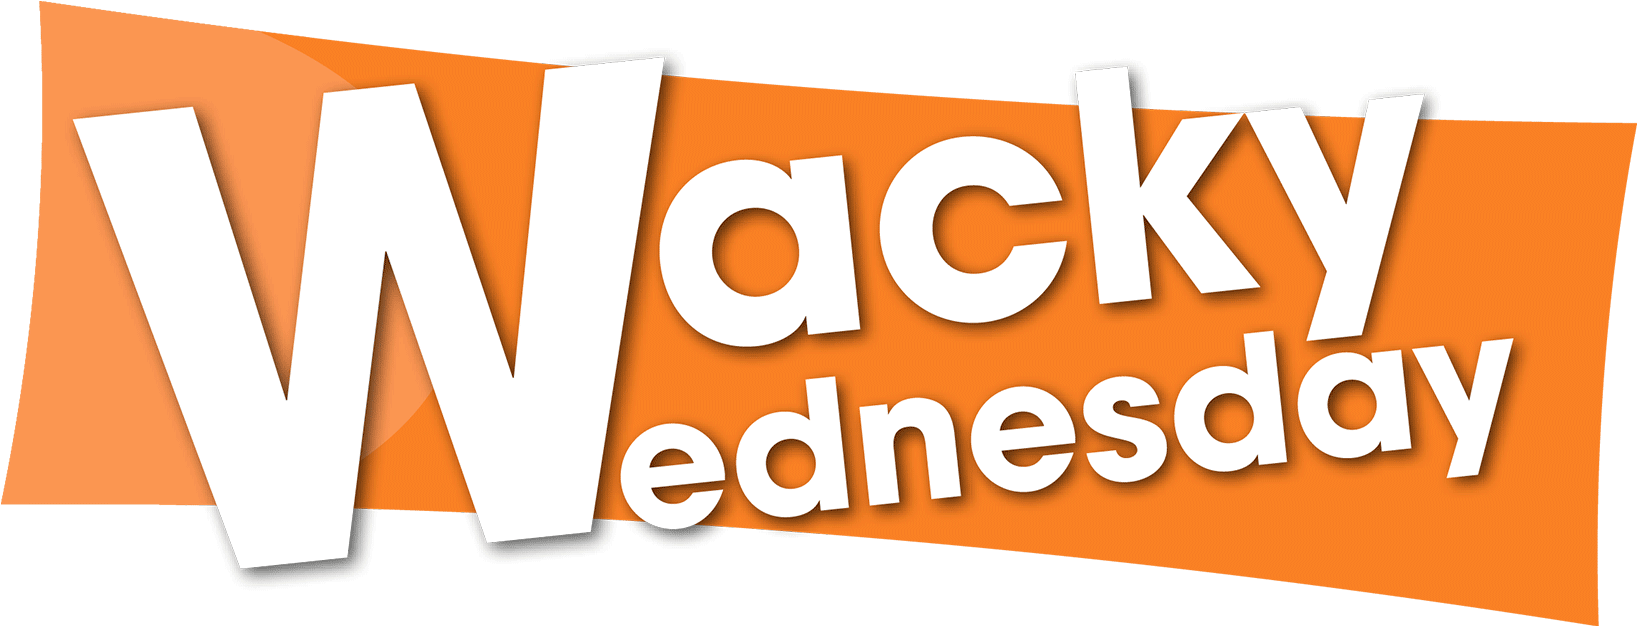 Wacky Wednesday Graphic PNG